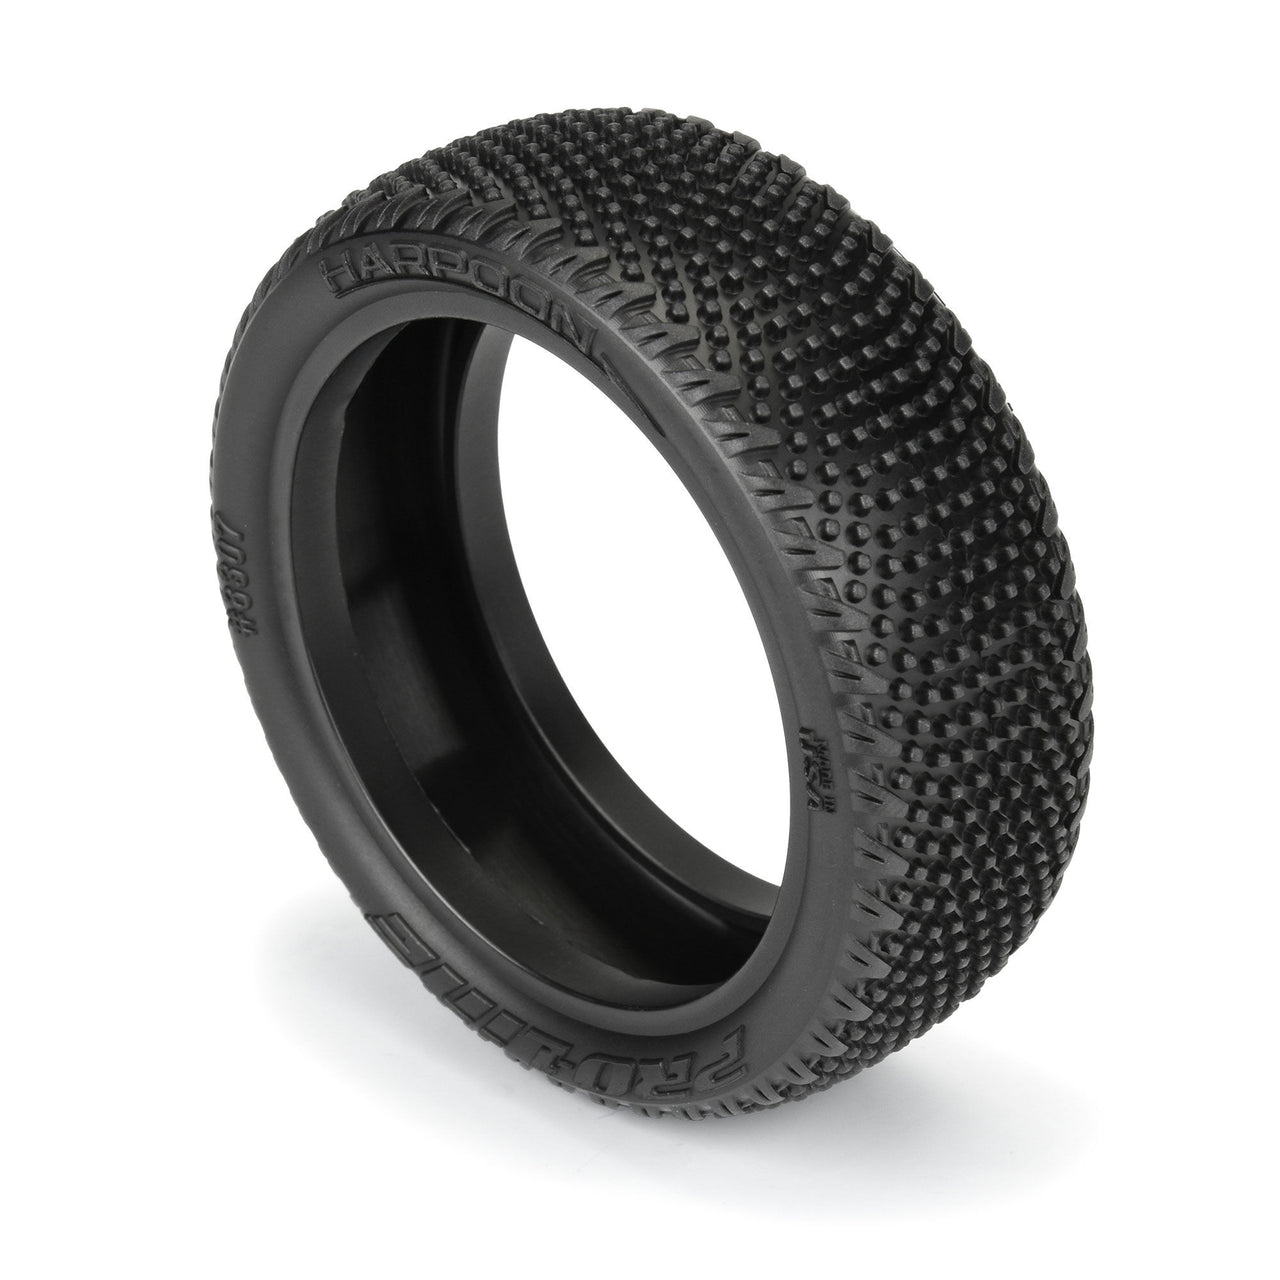 PRO8307304 1/10 Harpoon CR4 4WD Front 2.2" Carpet Buggy Tires (2)